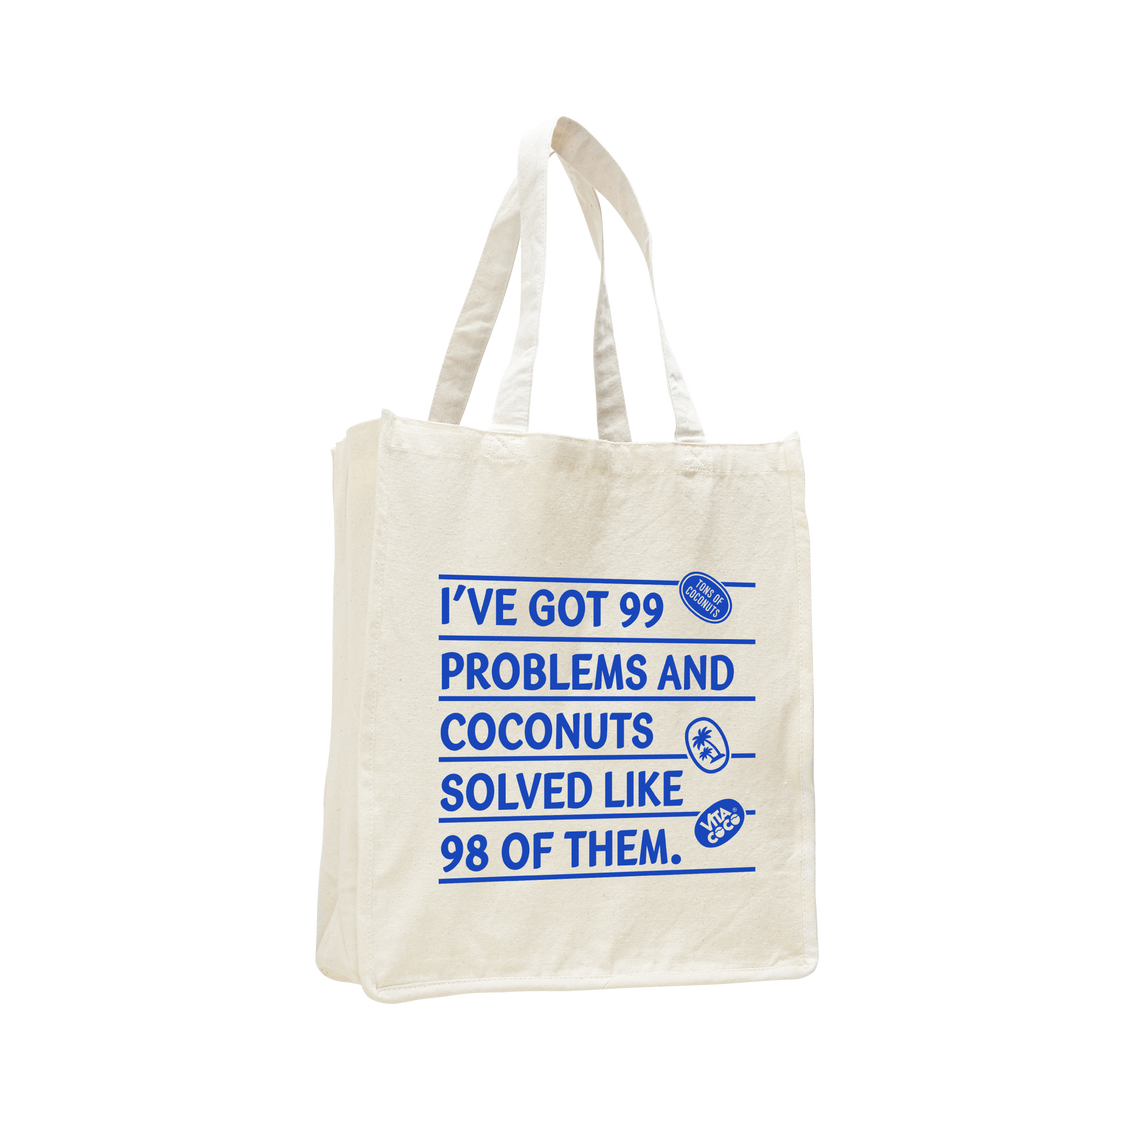 I've got 99 problems carrying coconuts, Vita Coco solved like them tote bag.